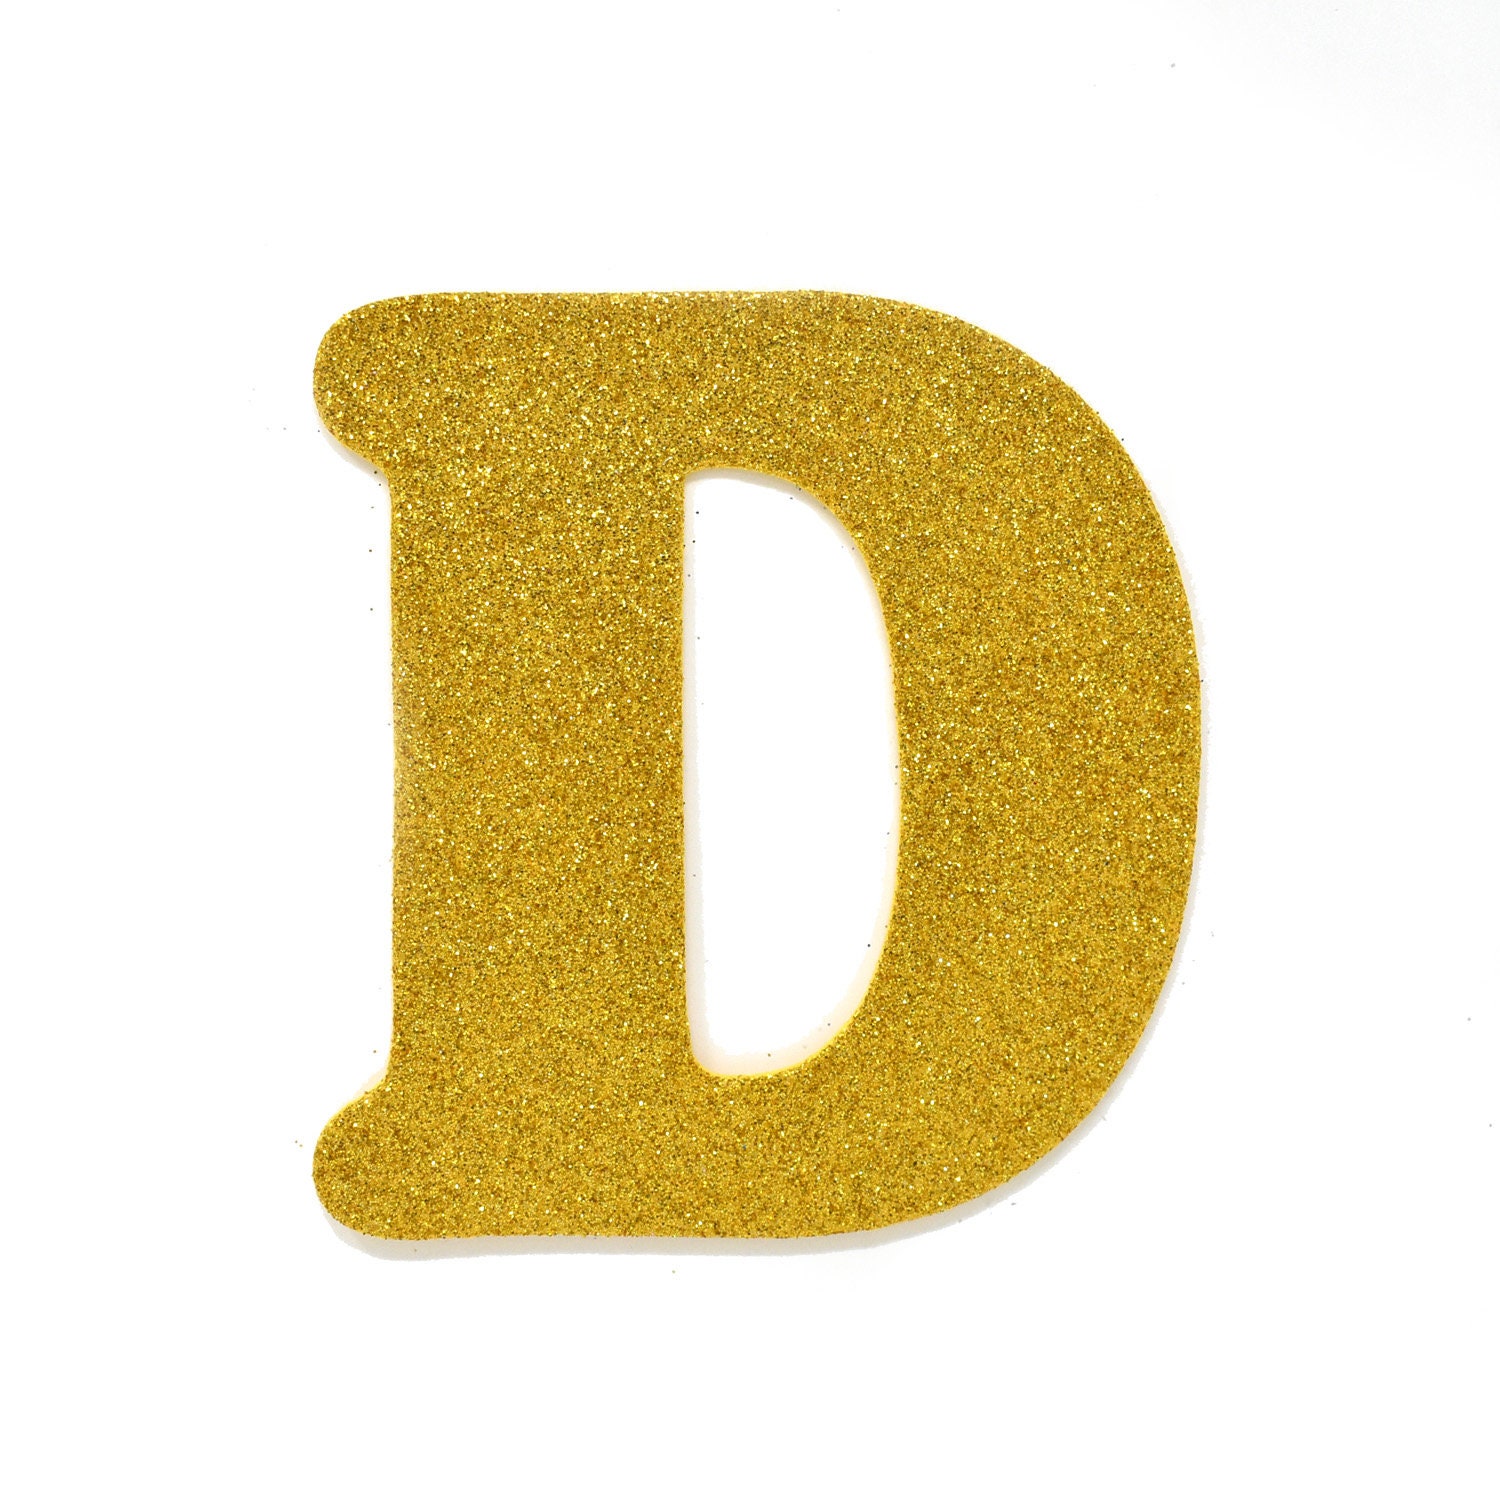 Homeford Glitter Cursive Alphabet Letters Stickers, 1-Inch, 50-Count (Gold)